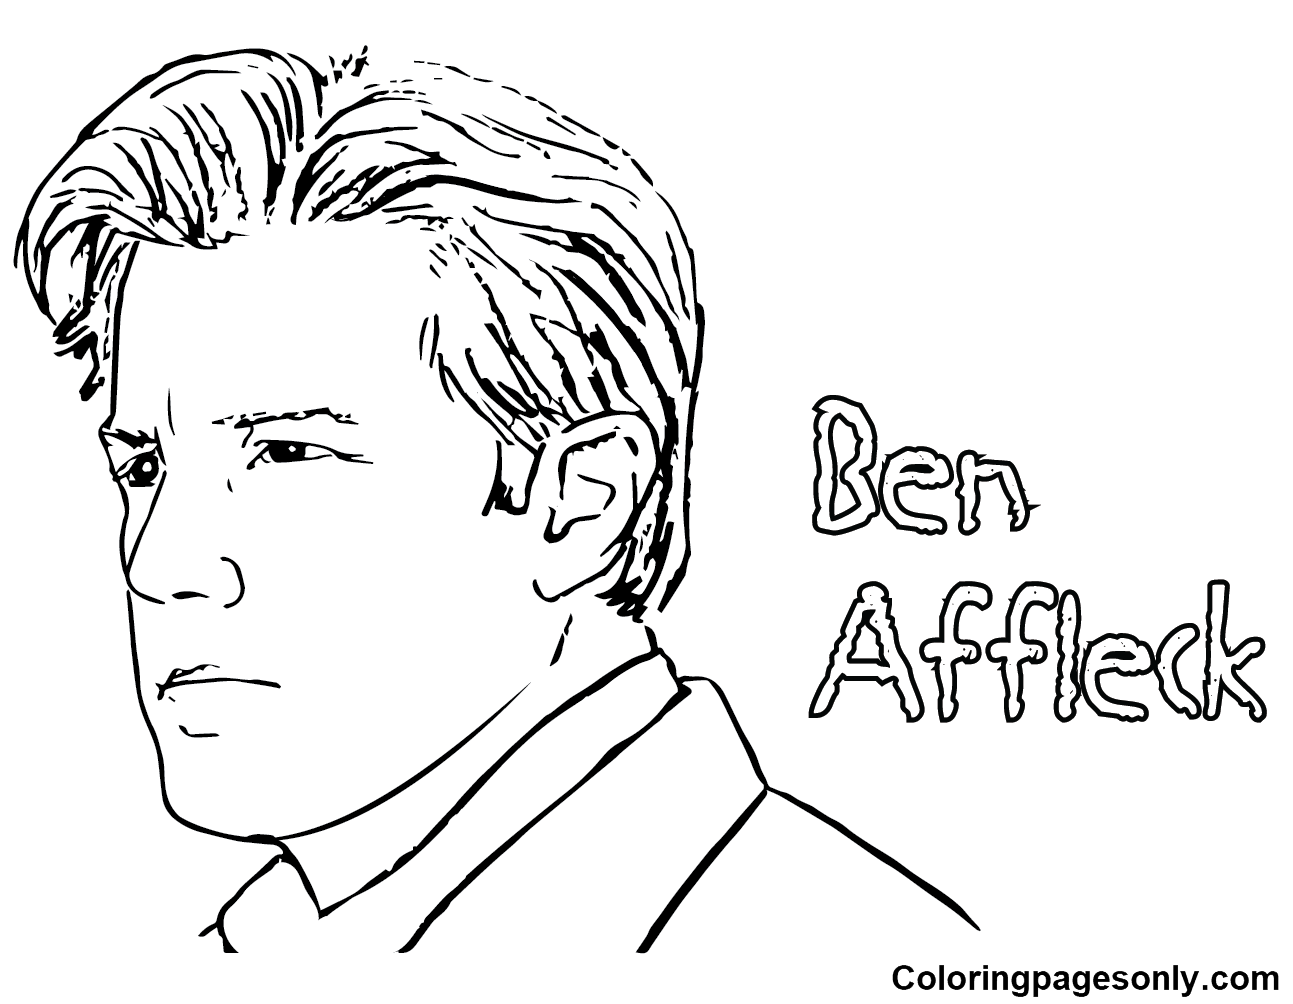 Free Ben Affleck Coloring Pages